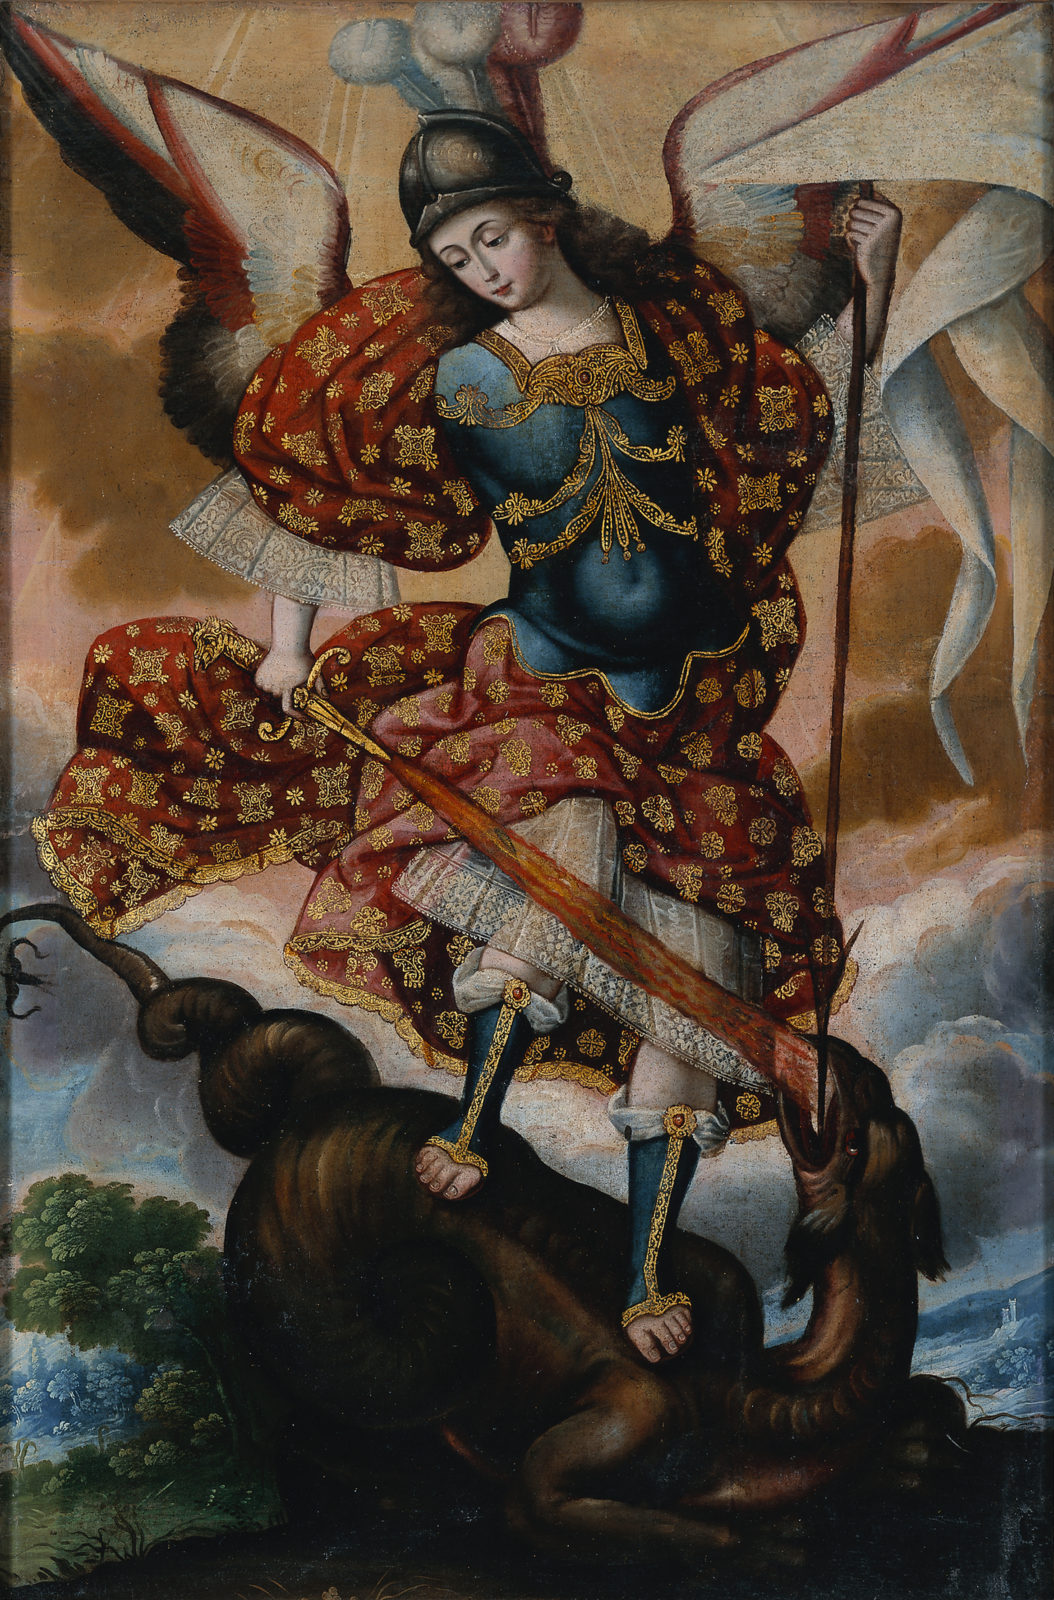 A painting depicting Saint Michael the Archangel with his flaming sword standing triumphantly on Satan as a dragon.